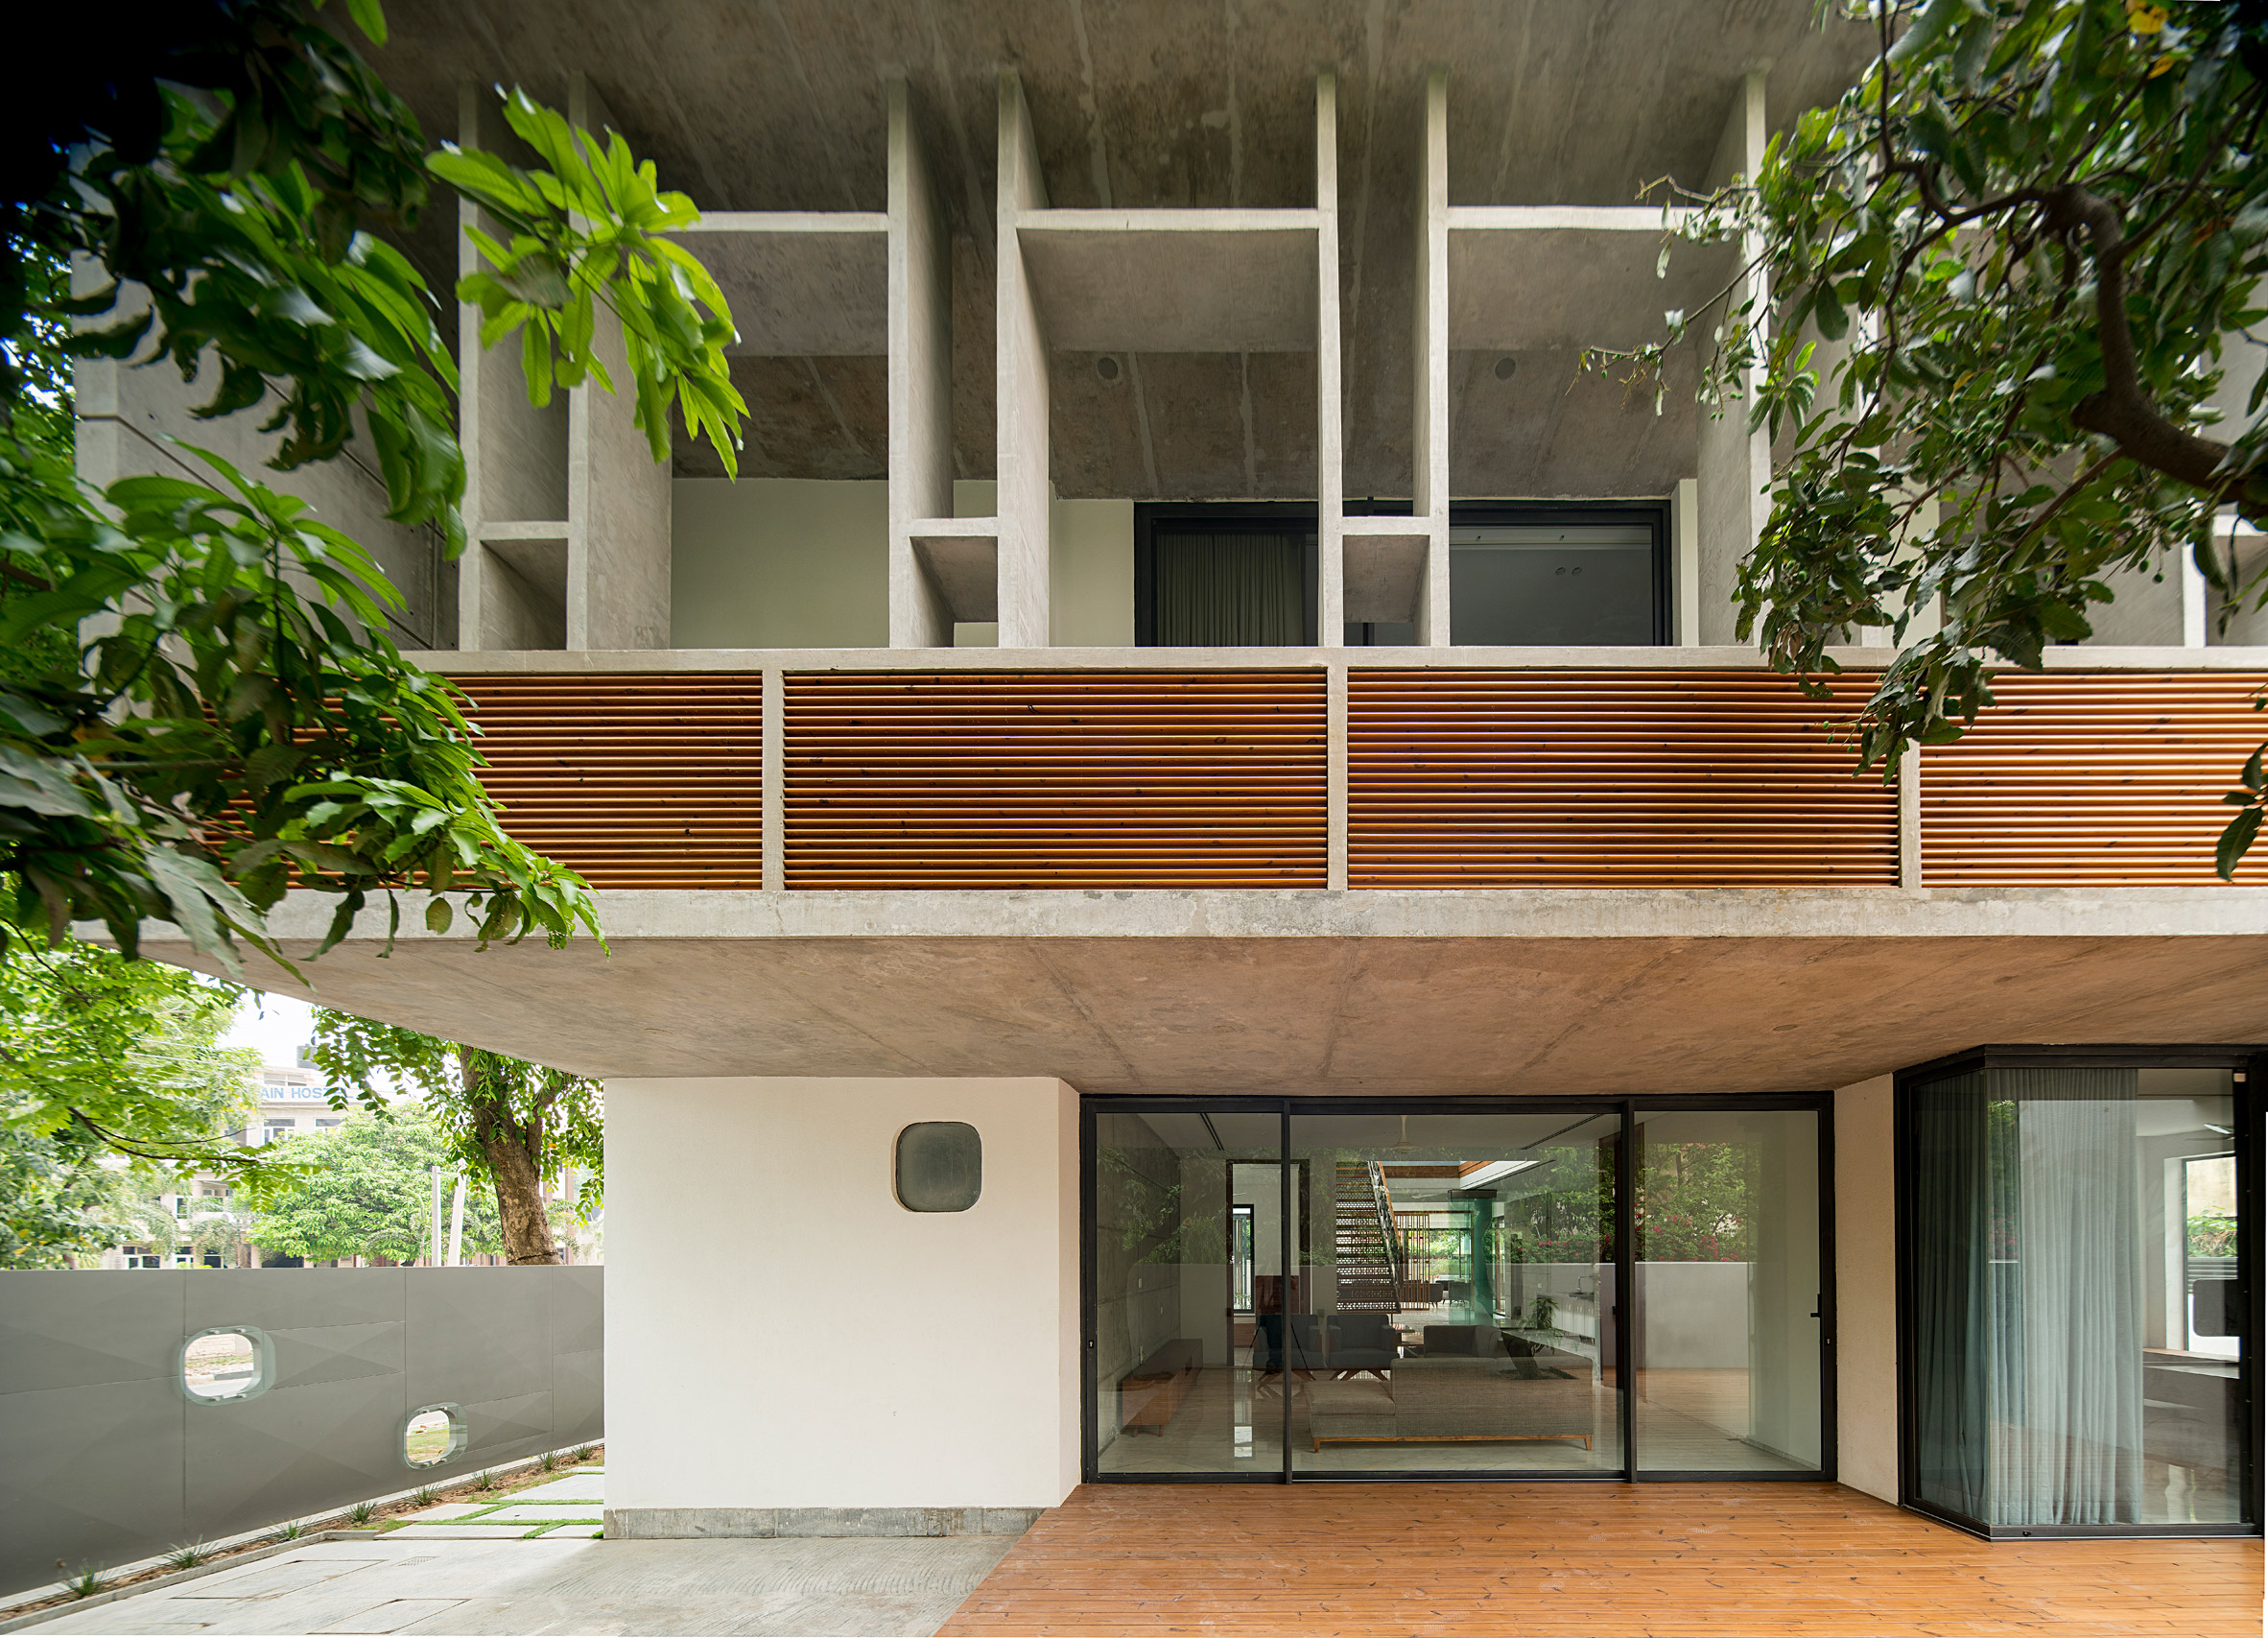 https://static.dezeen.com/uploads/2020/03/residence-1065-charged-voids-house-india-architecture_dezeen_2364_col_9.jpg